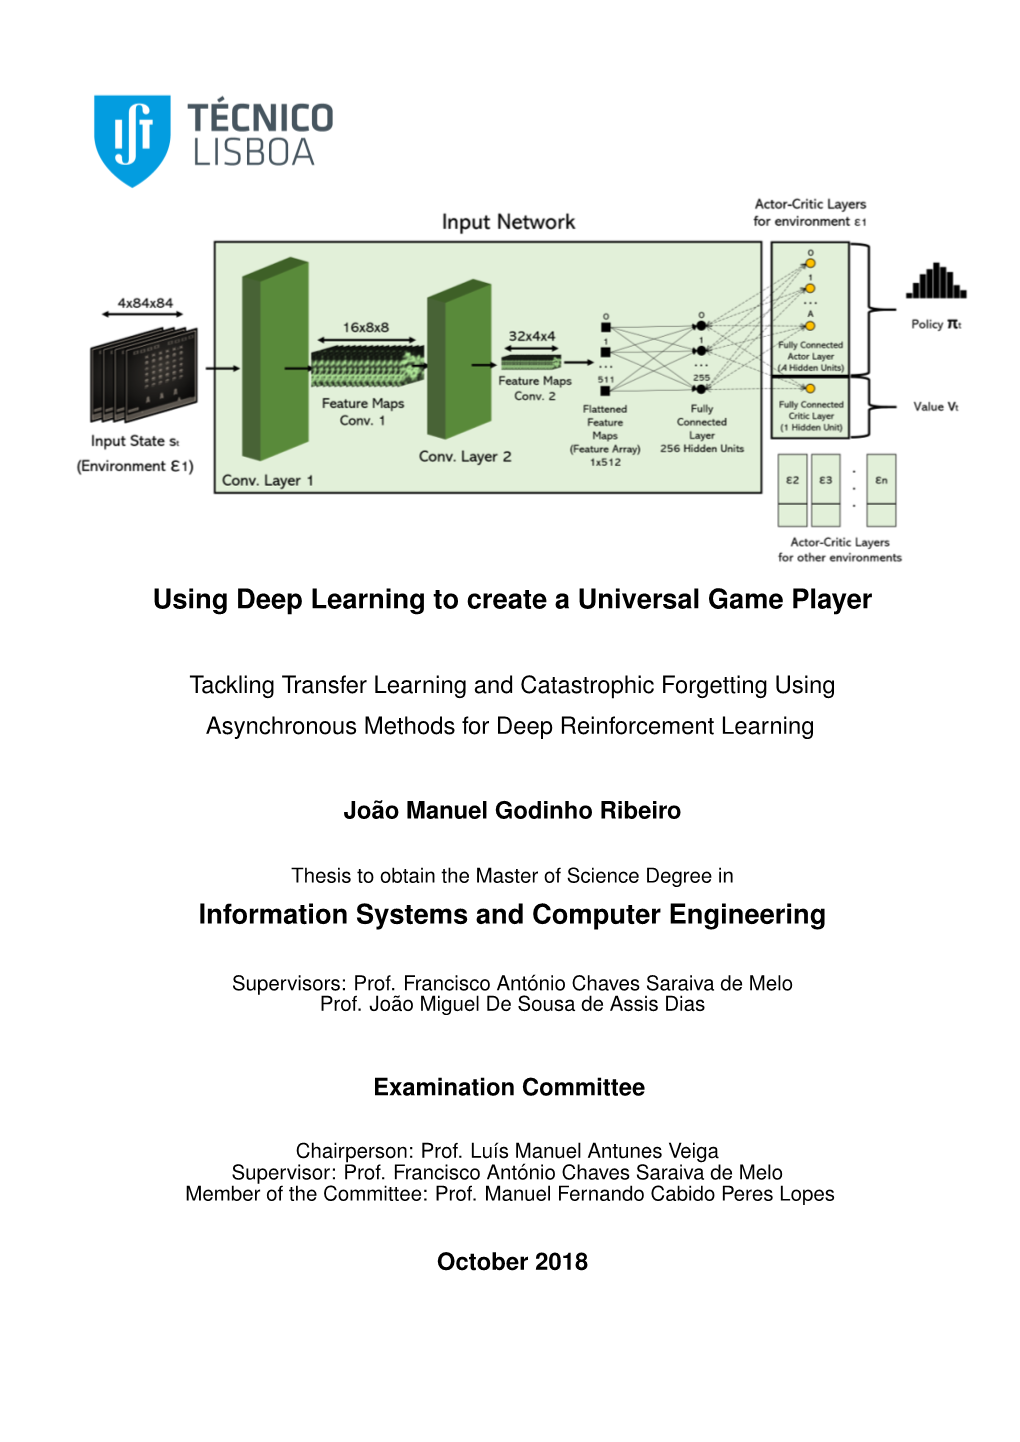 Using Deep Learning to Create a Universal Game Player